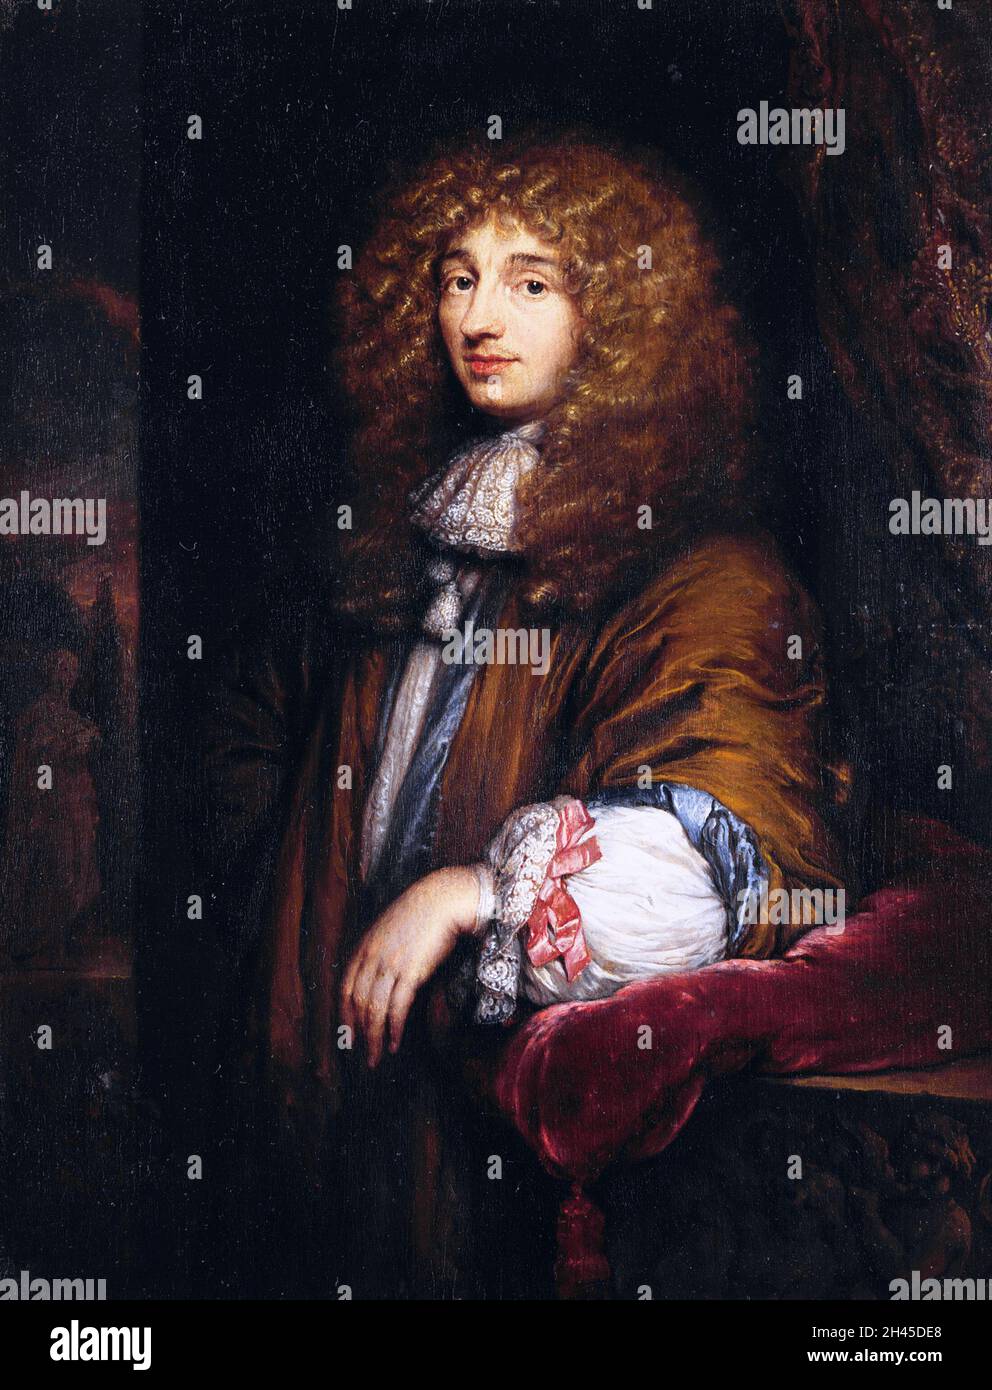 A portrait of the 17th century Dutch physicist and mathematician Christiaan Huygens Stock Photo